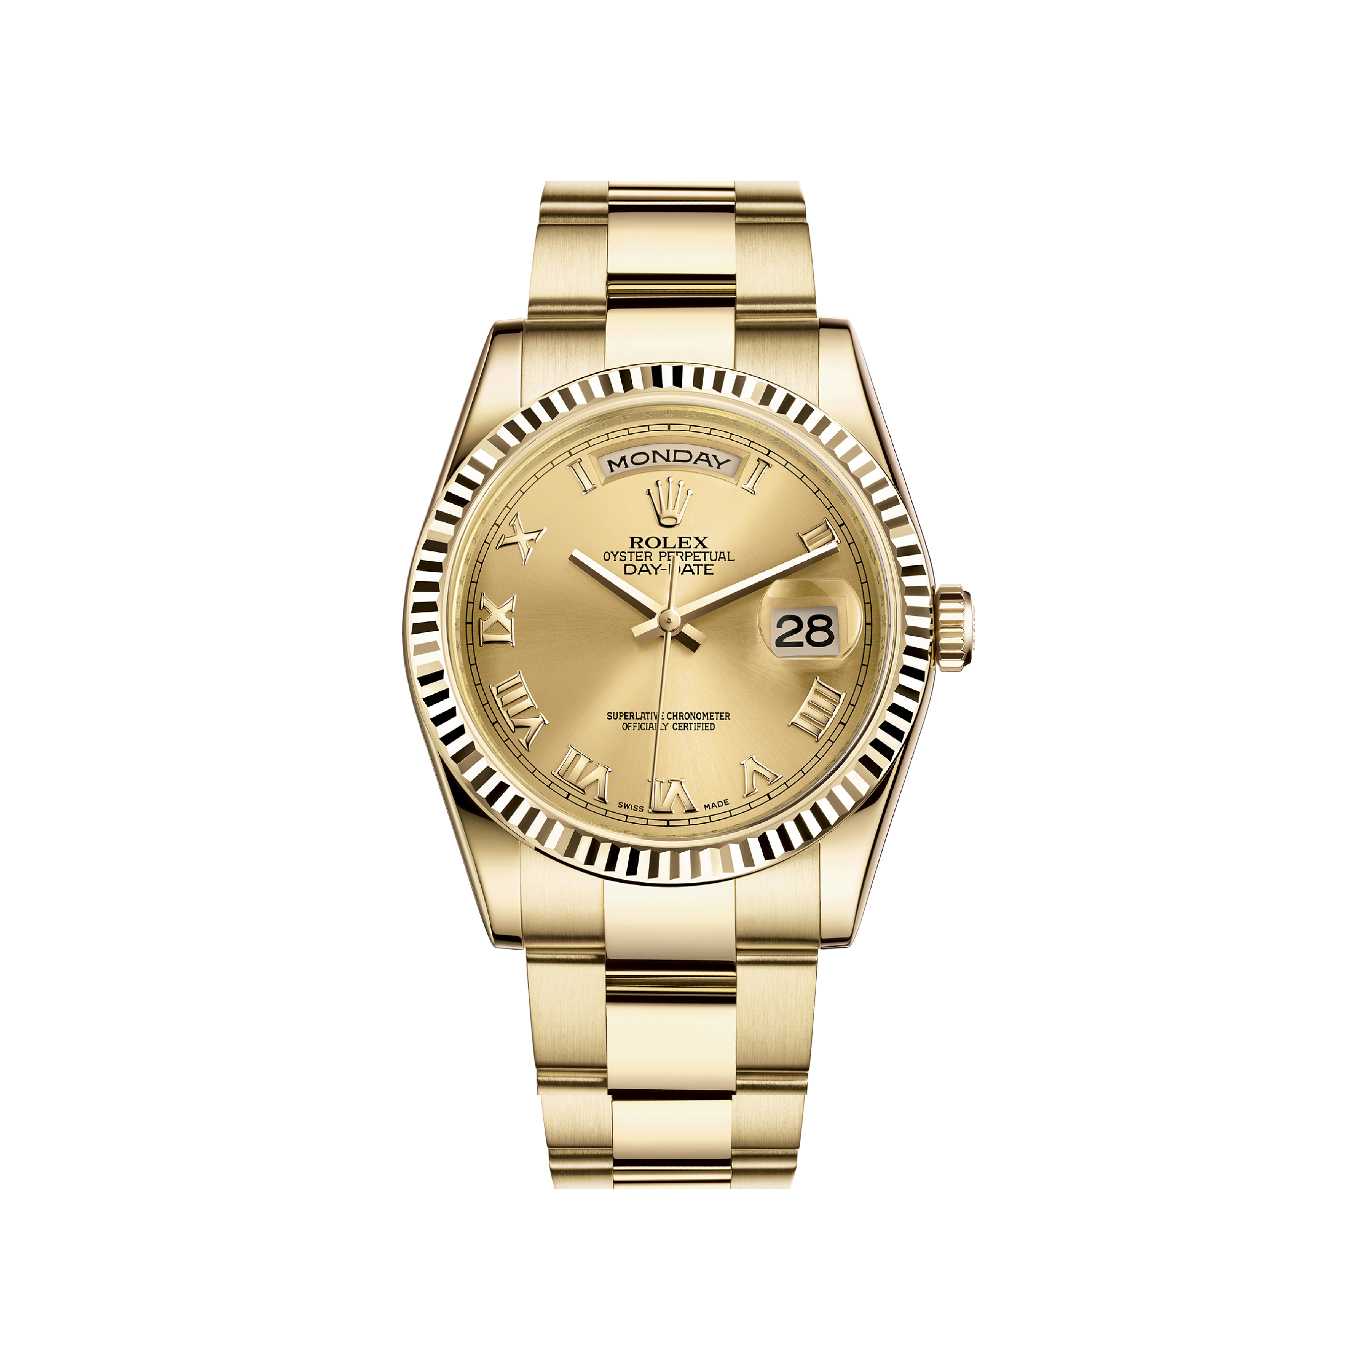 Day-Date 36 118238 Gold Watch (Champagne)